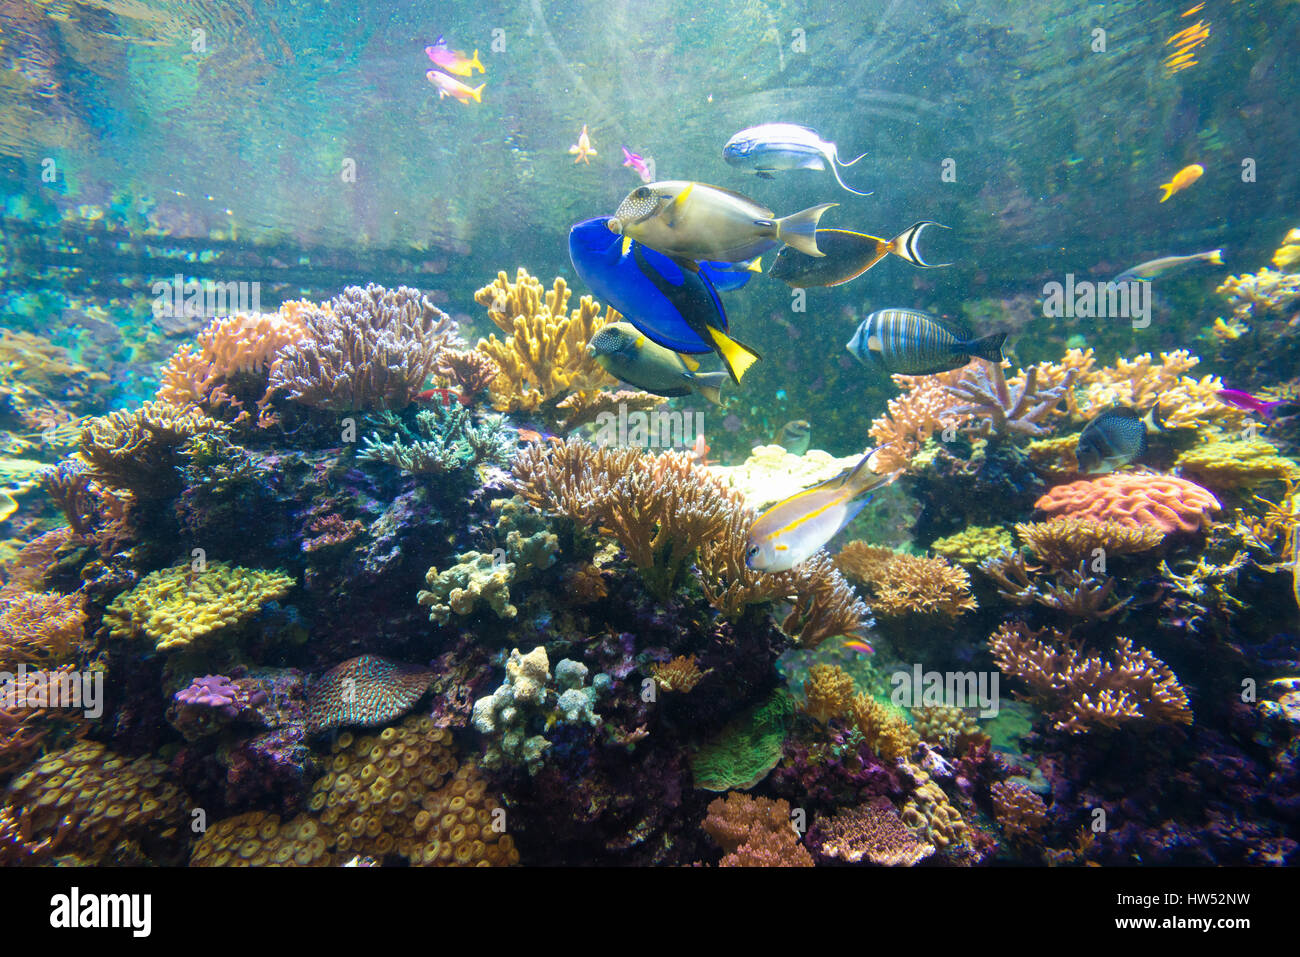 Wonderful and beautiful underwater world with corals and tropical fish. Stock Photo